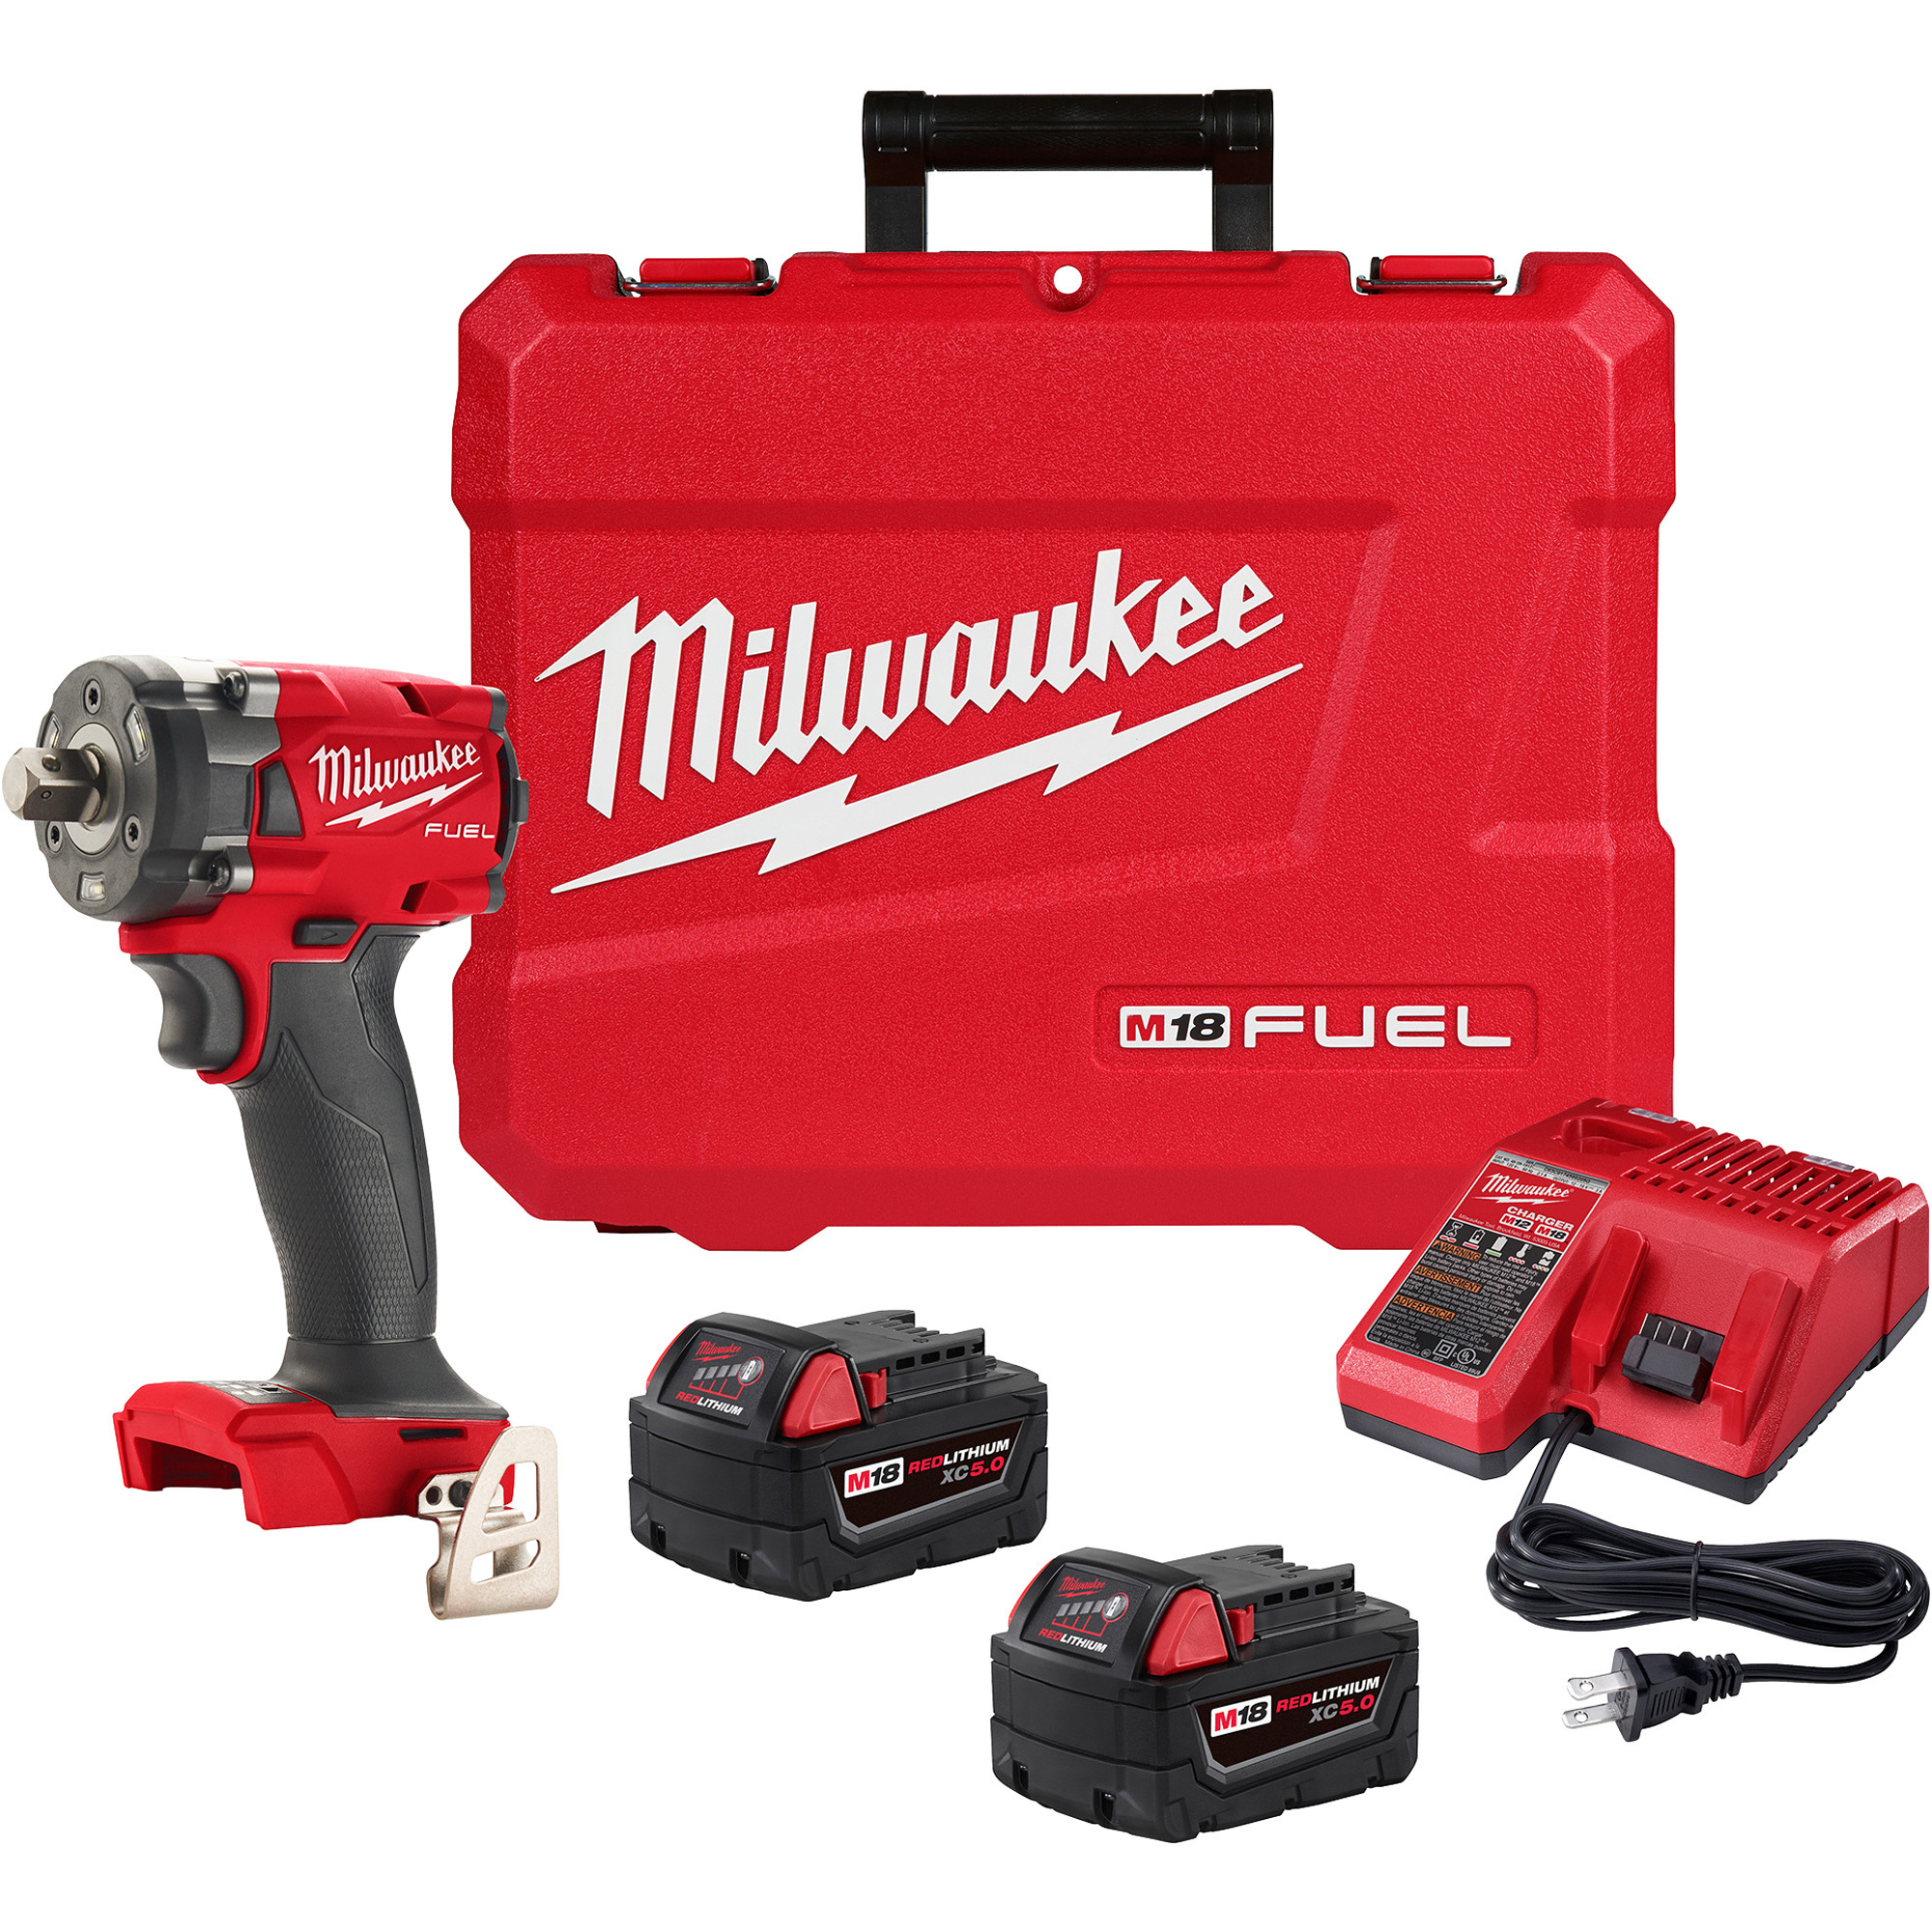 M18 FUEL Compact Impact Wrench with Pin Detent Kit — 1/2Inch Drive, 250 Ft./Lbs. Torque, Model - Milwaukee 2855P-22R